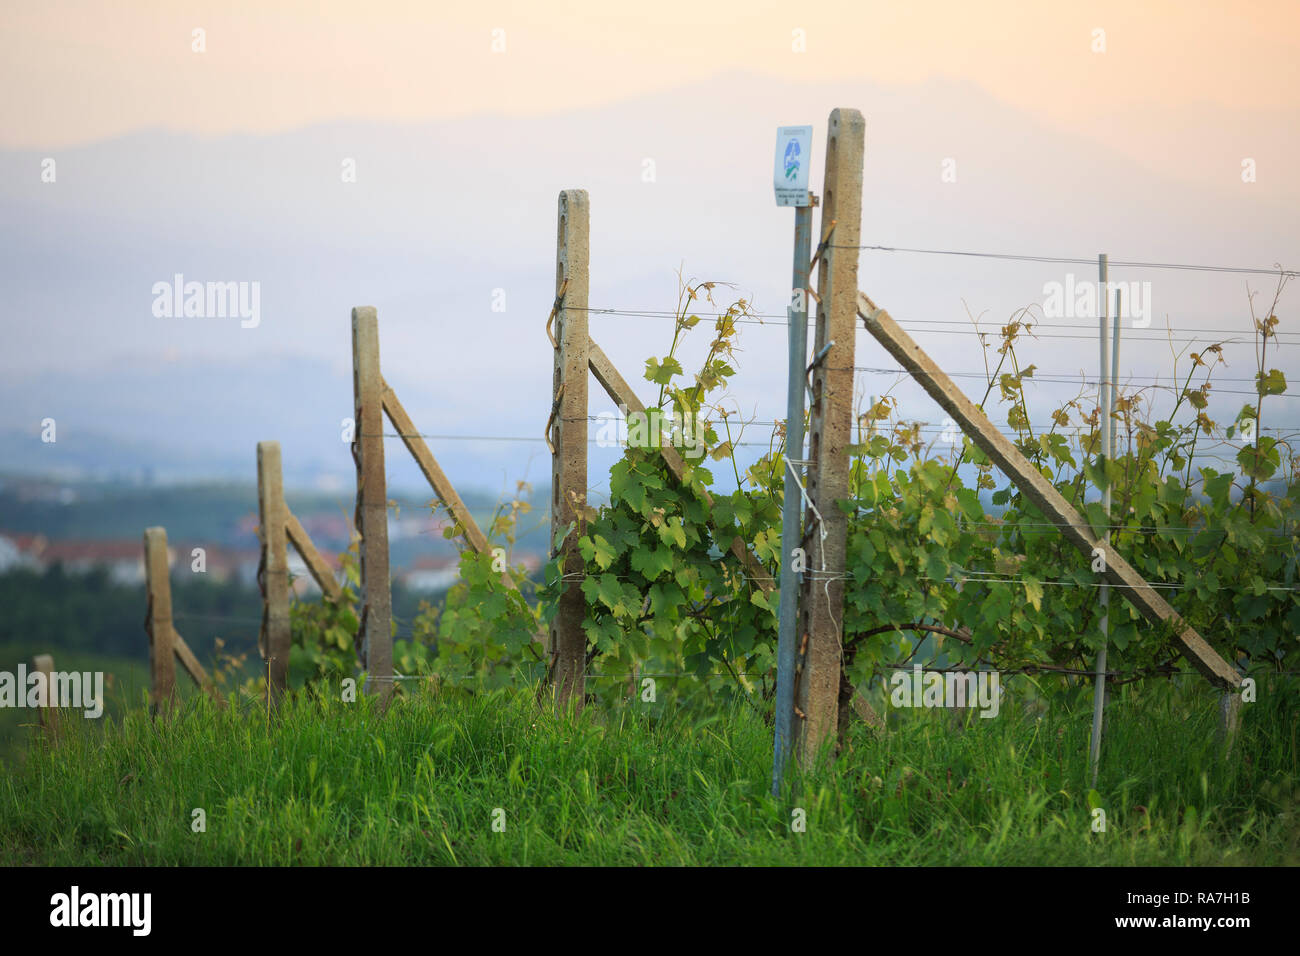 the landscape of vineyards in the Piedmont region of Northern Italy, near Barolo Stock Photo